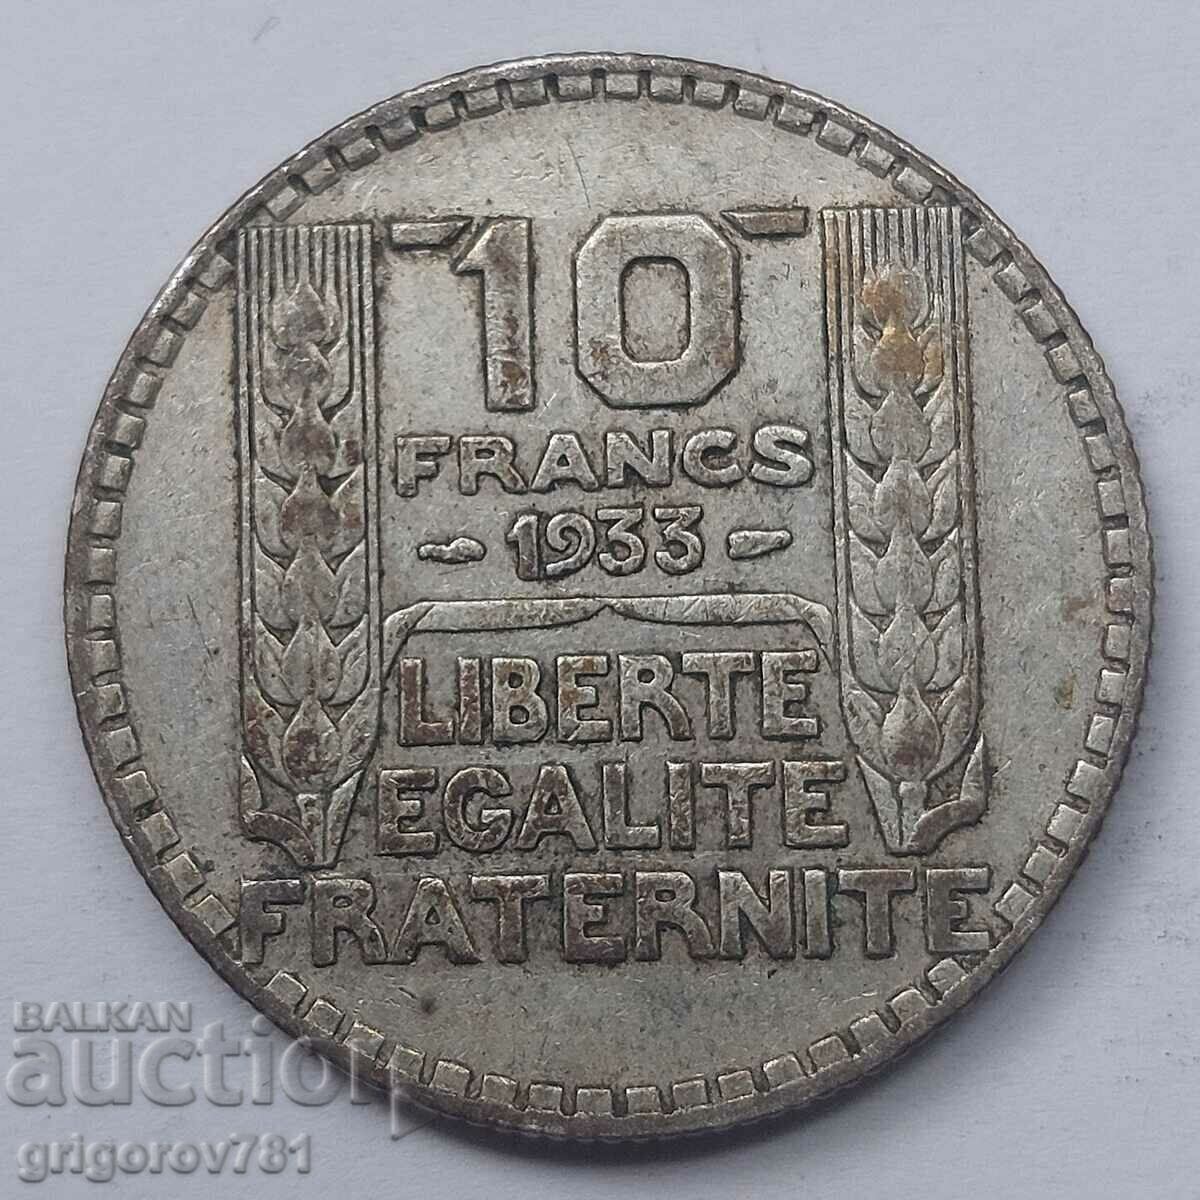 10 Francs Silver France 1933 - Silver Coin #29